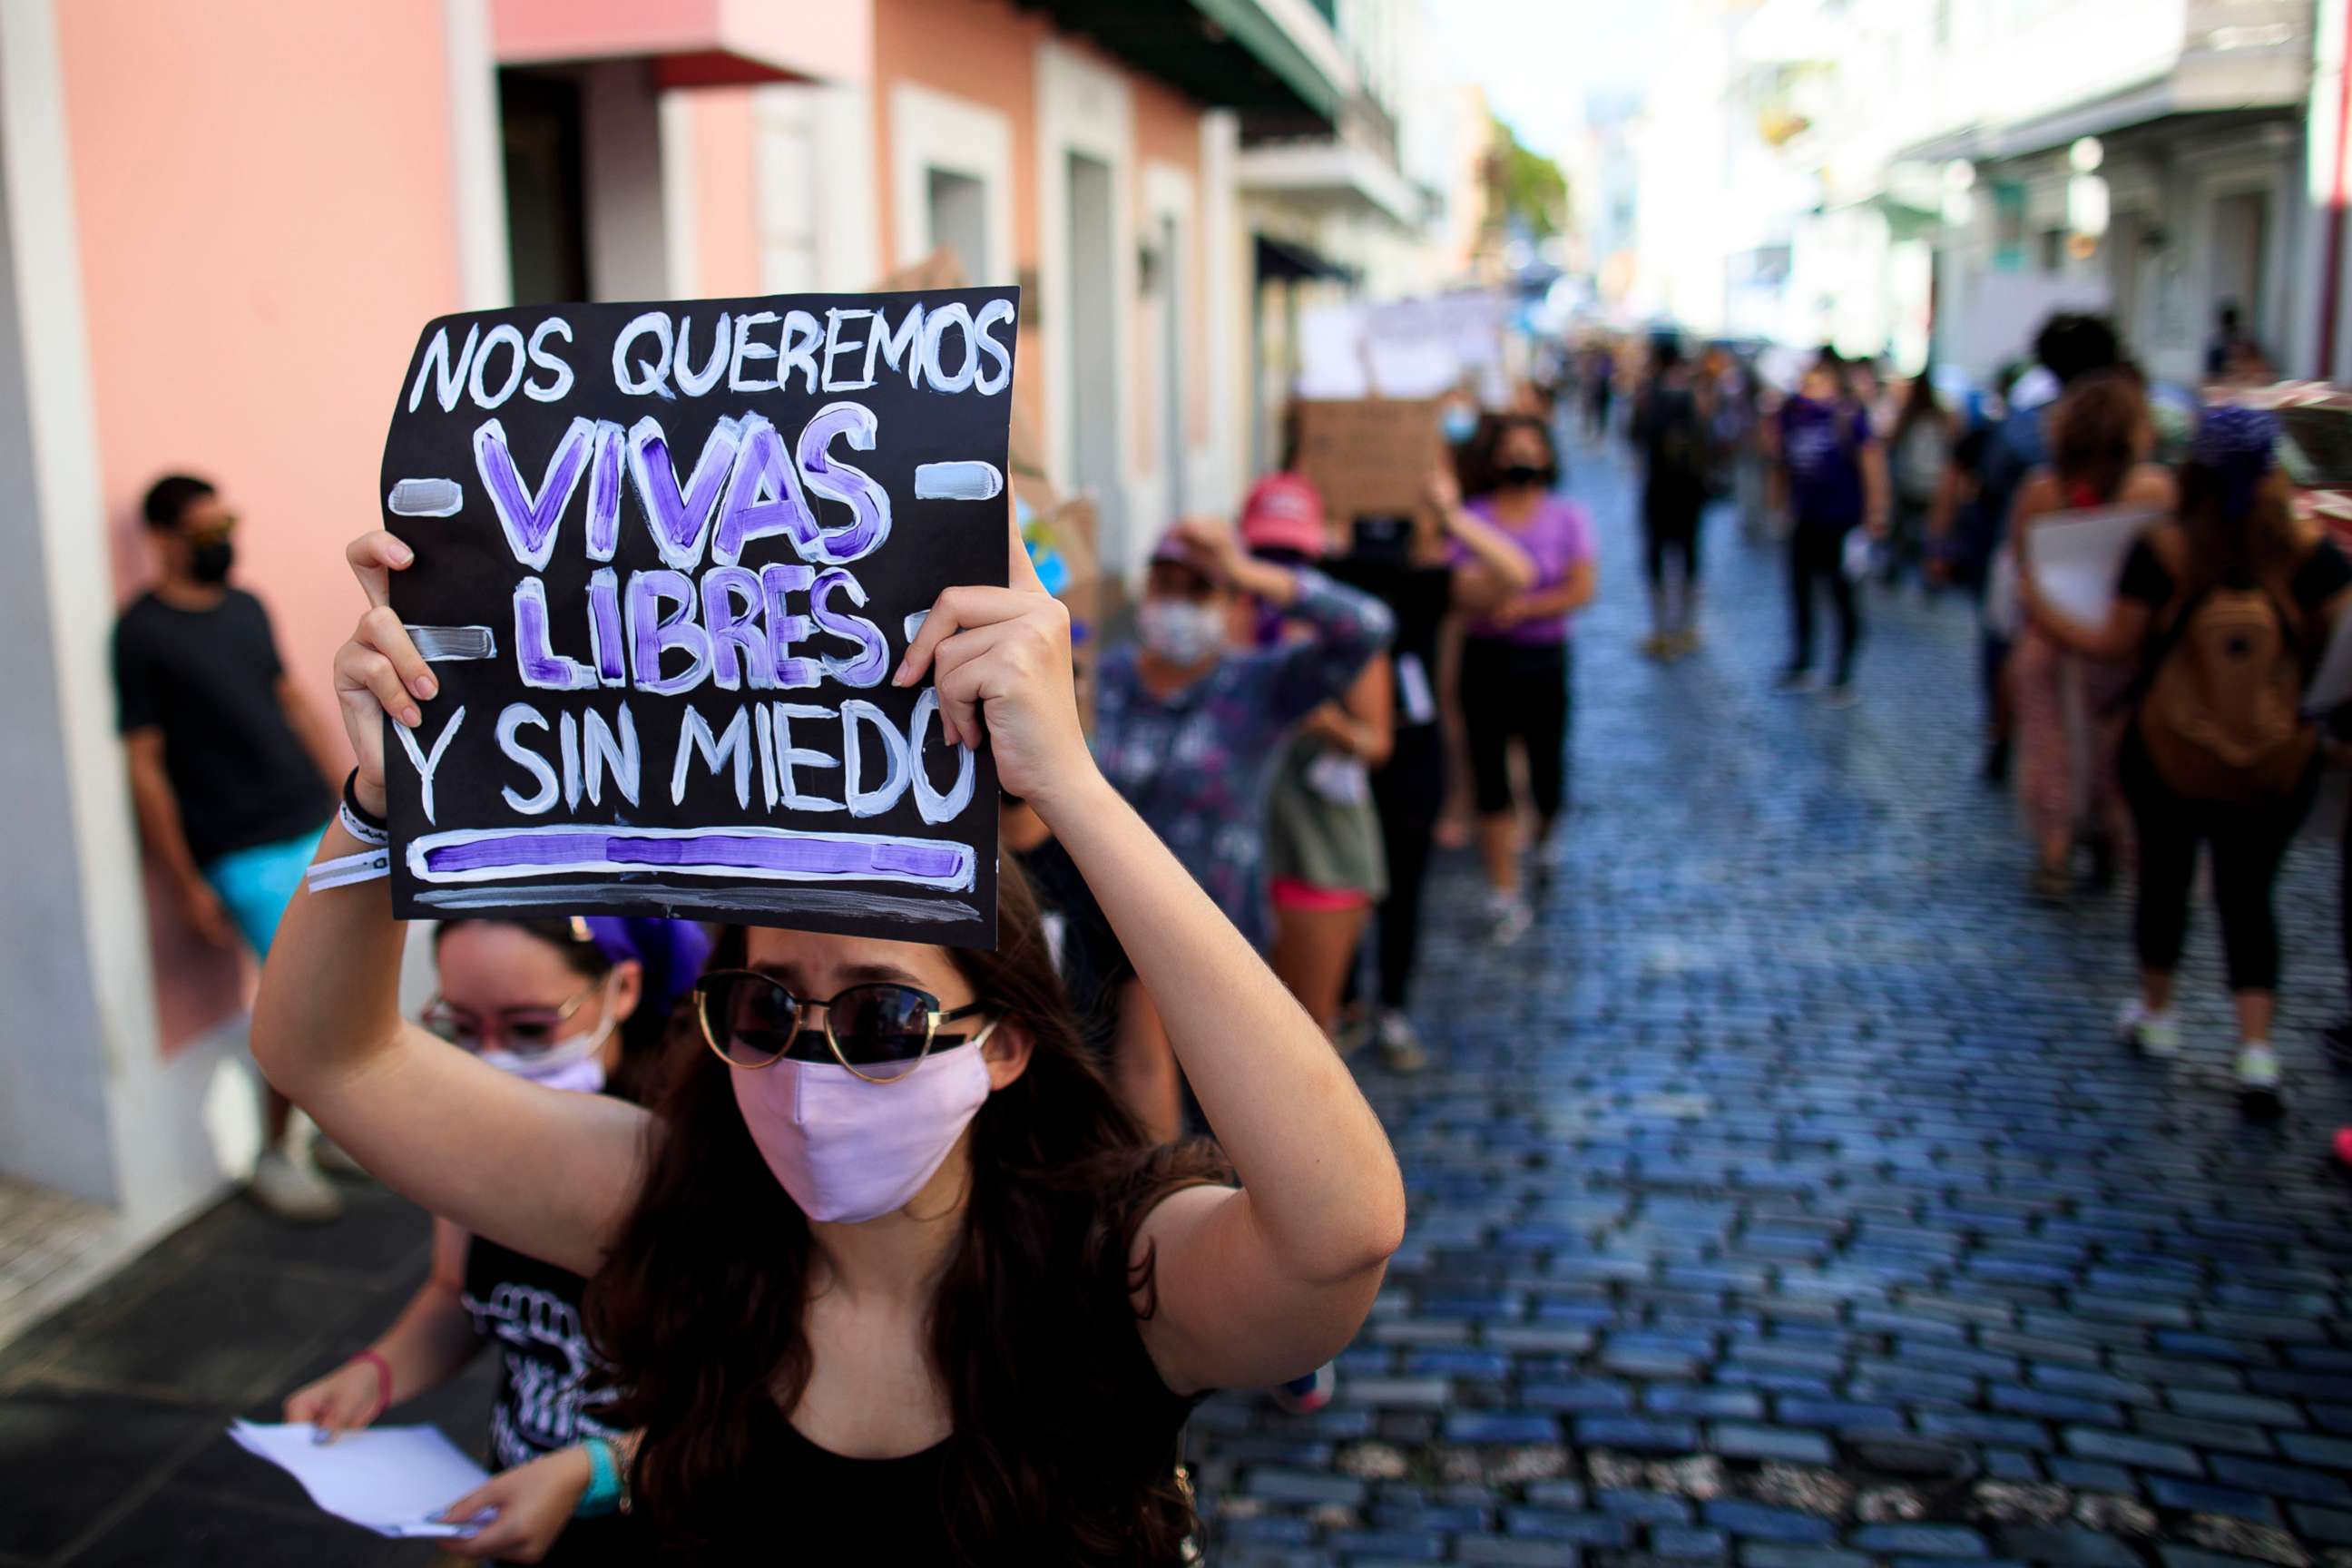 PHOTO: Demonstrators march in protest of gender violence against women in San Juan, Puerto Rico, May 3, 2021.